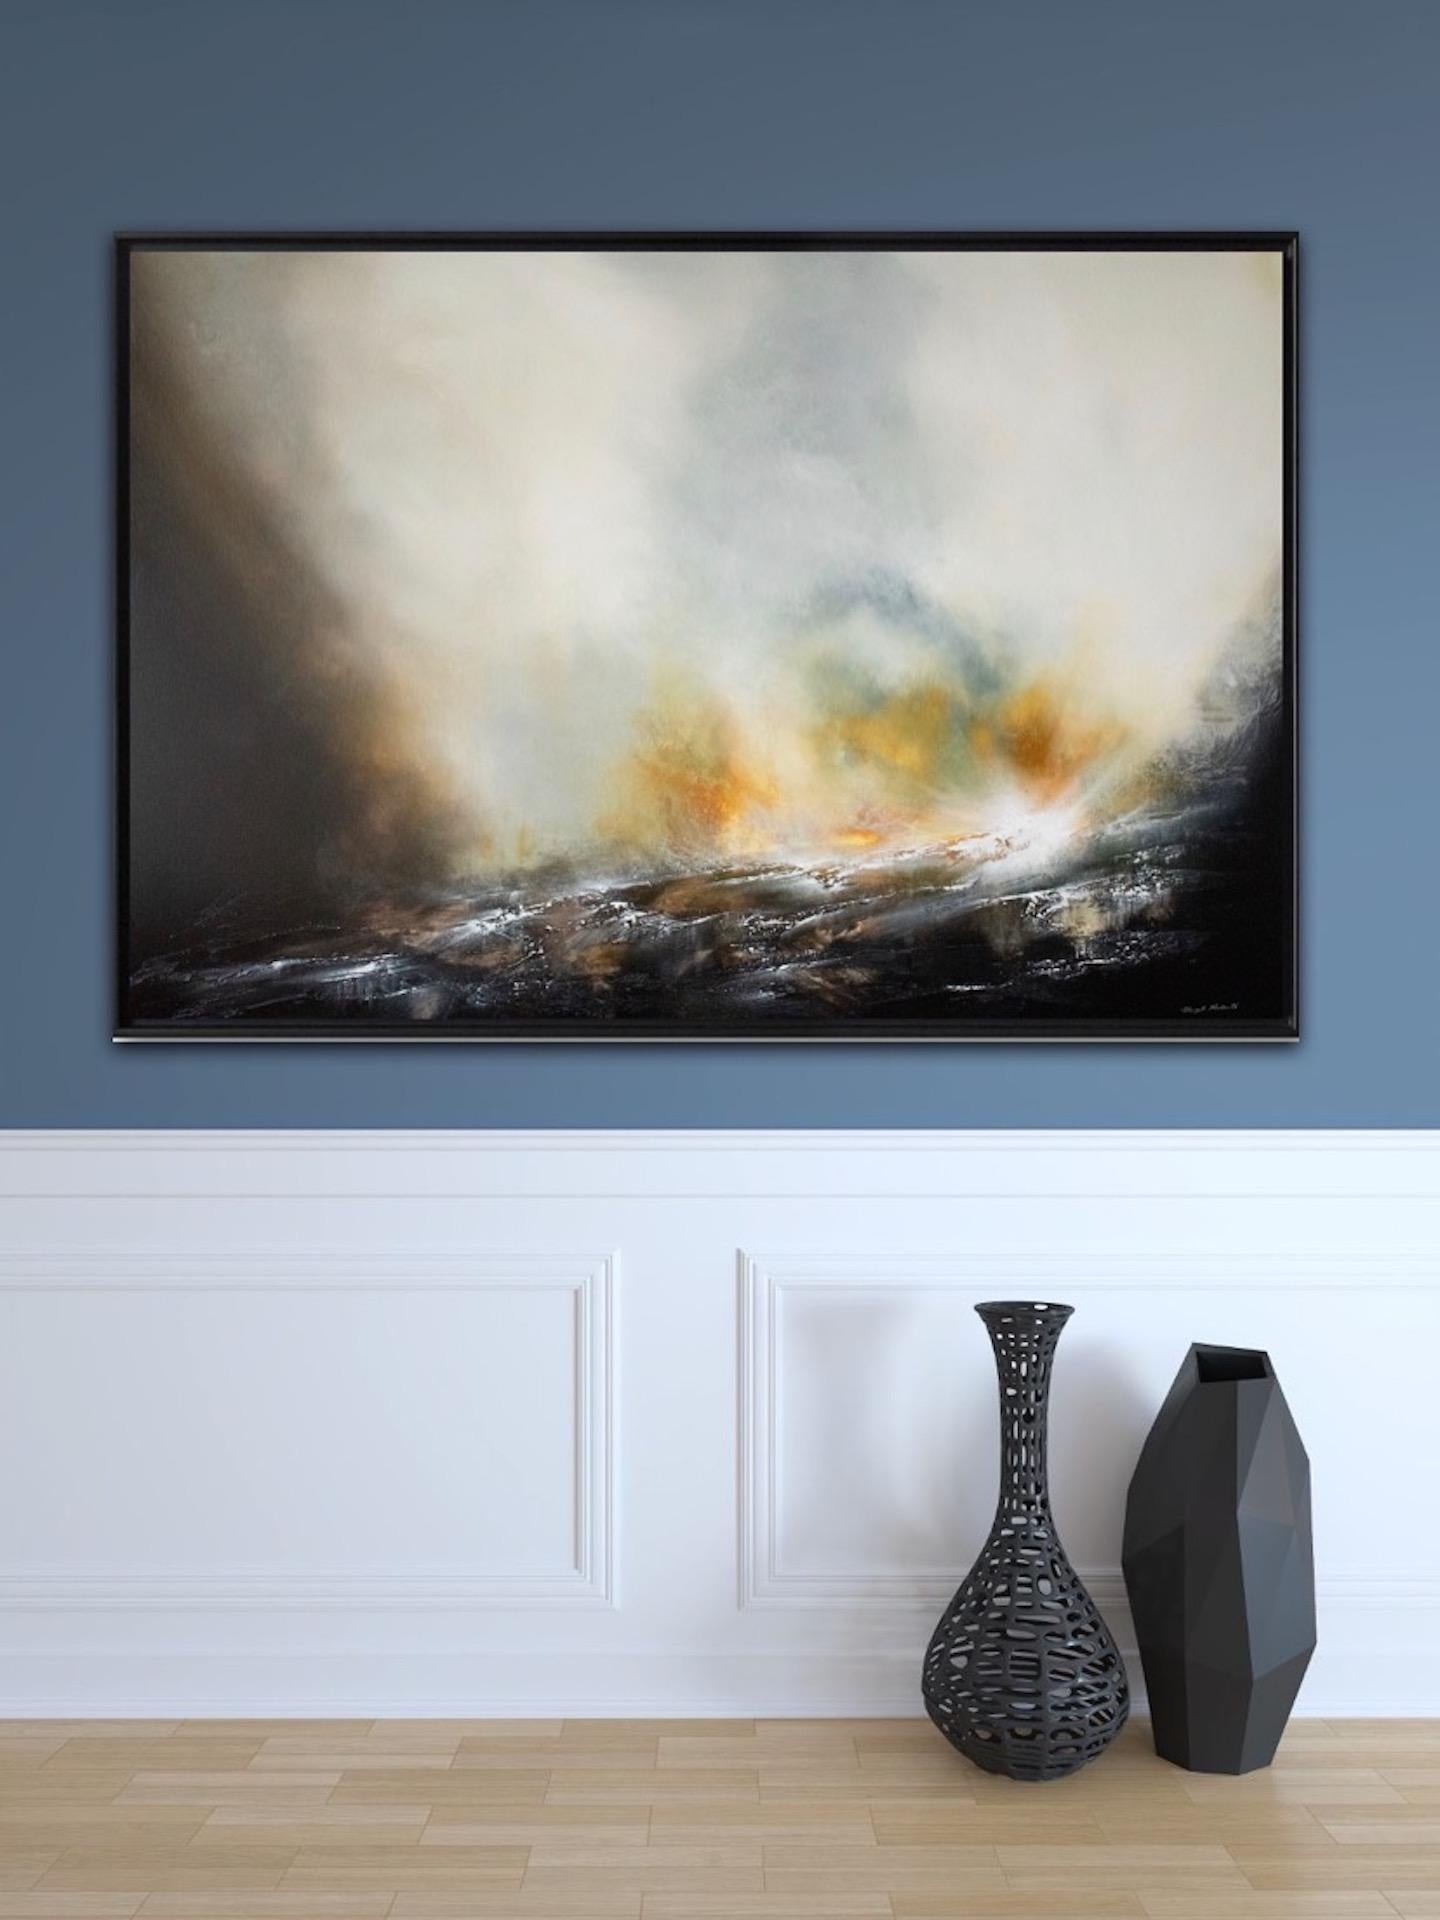 Sheryl Roberts
The Trail of Happiness
Original Landscape Painting
Oil and Acrylic Paint on Canvas
Size: H 106cm x W 156cm
Sold in a Black Float Frame
(Please note that in situ images are purely an indication of how a piece may look).

The Trail of